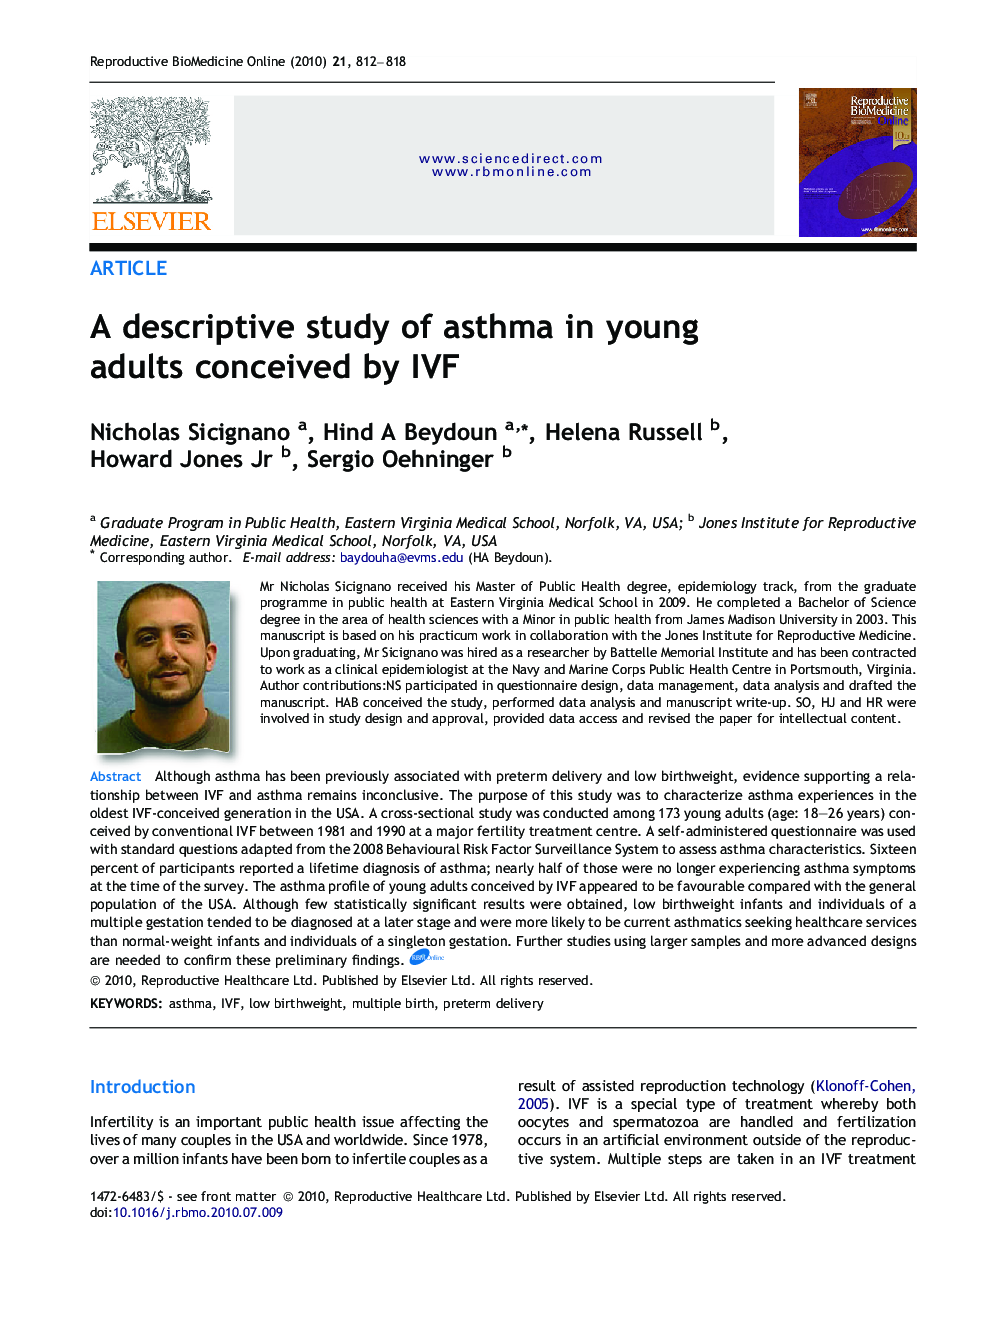 A descriptive study of asthma in young adults conceived by IVF 